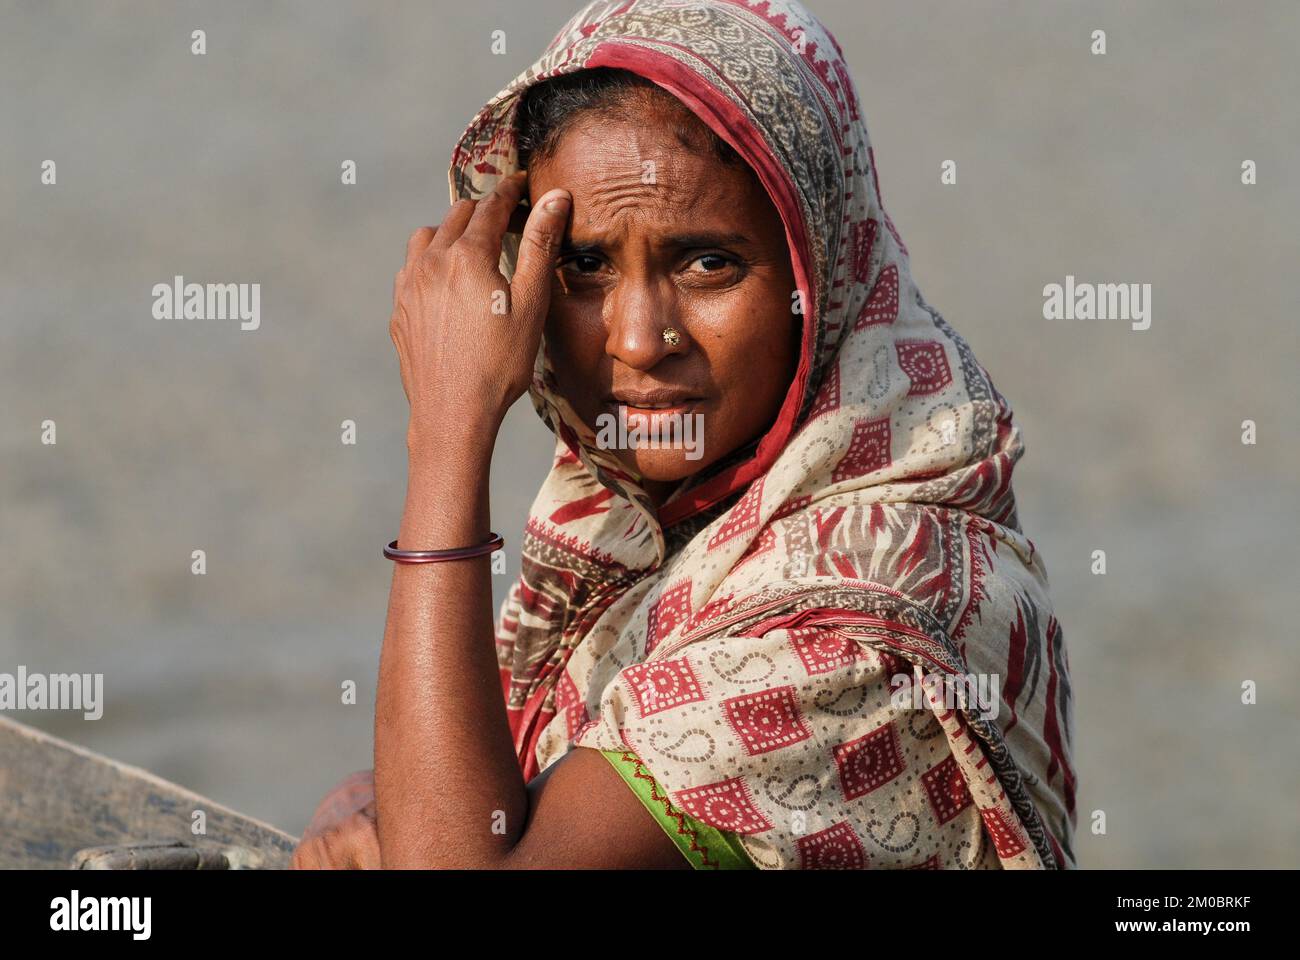 BANGLADESH, Khulna, bay of bengal, village Kalabogi at river Shibsha, the region is affected by flloods and submergence due to climate change, portraiture of woman Stock Photo